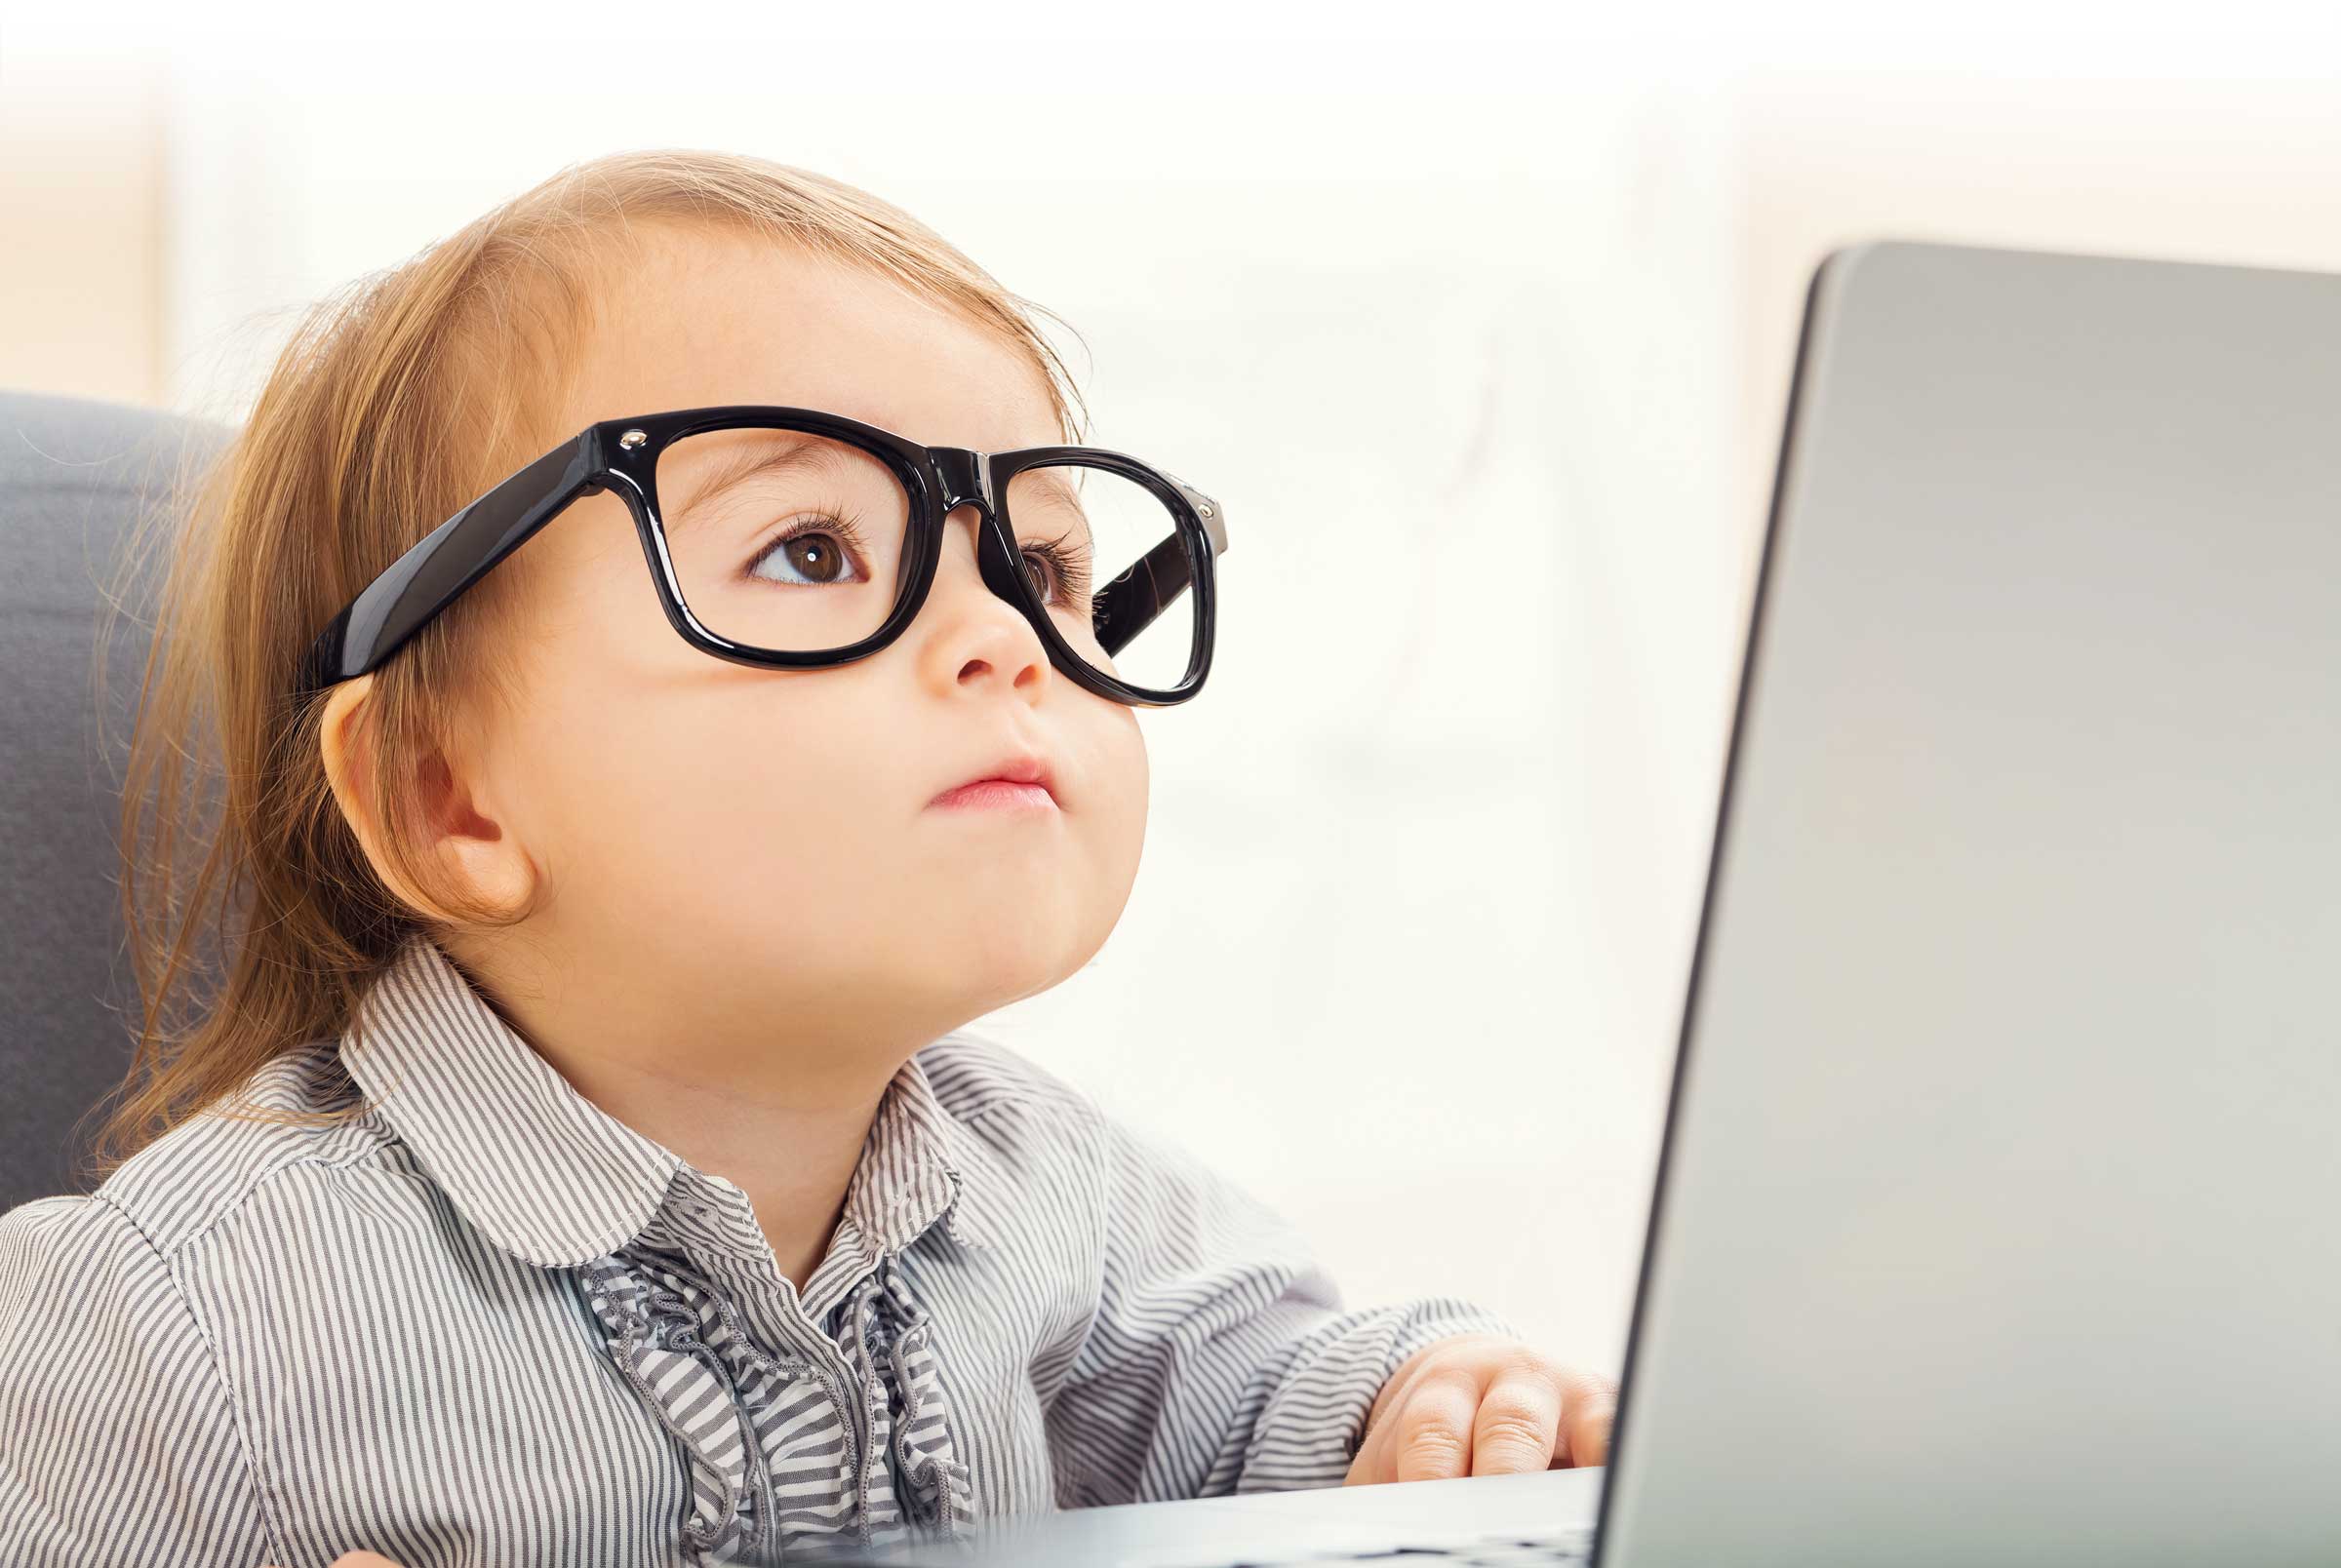 Young girl with glasses studying financial information on computer